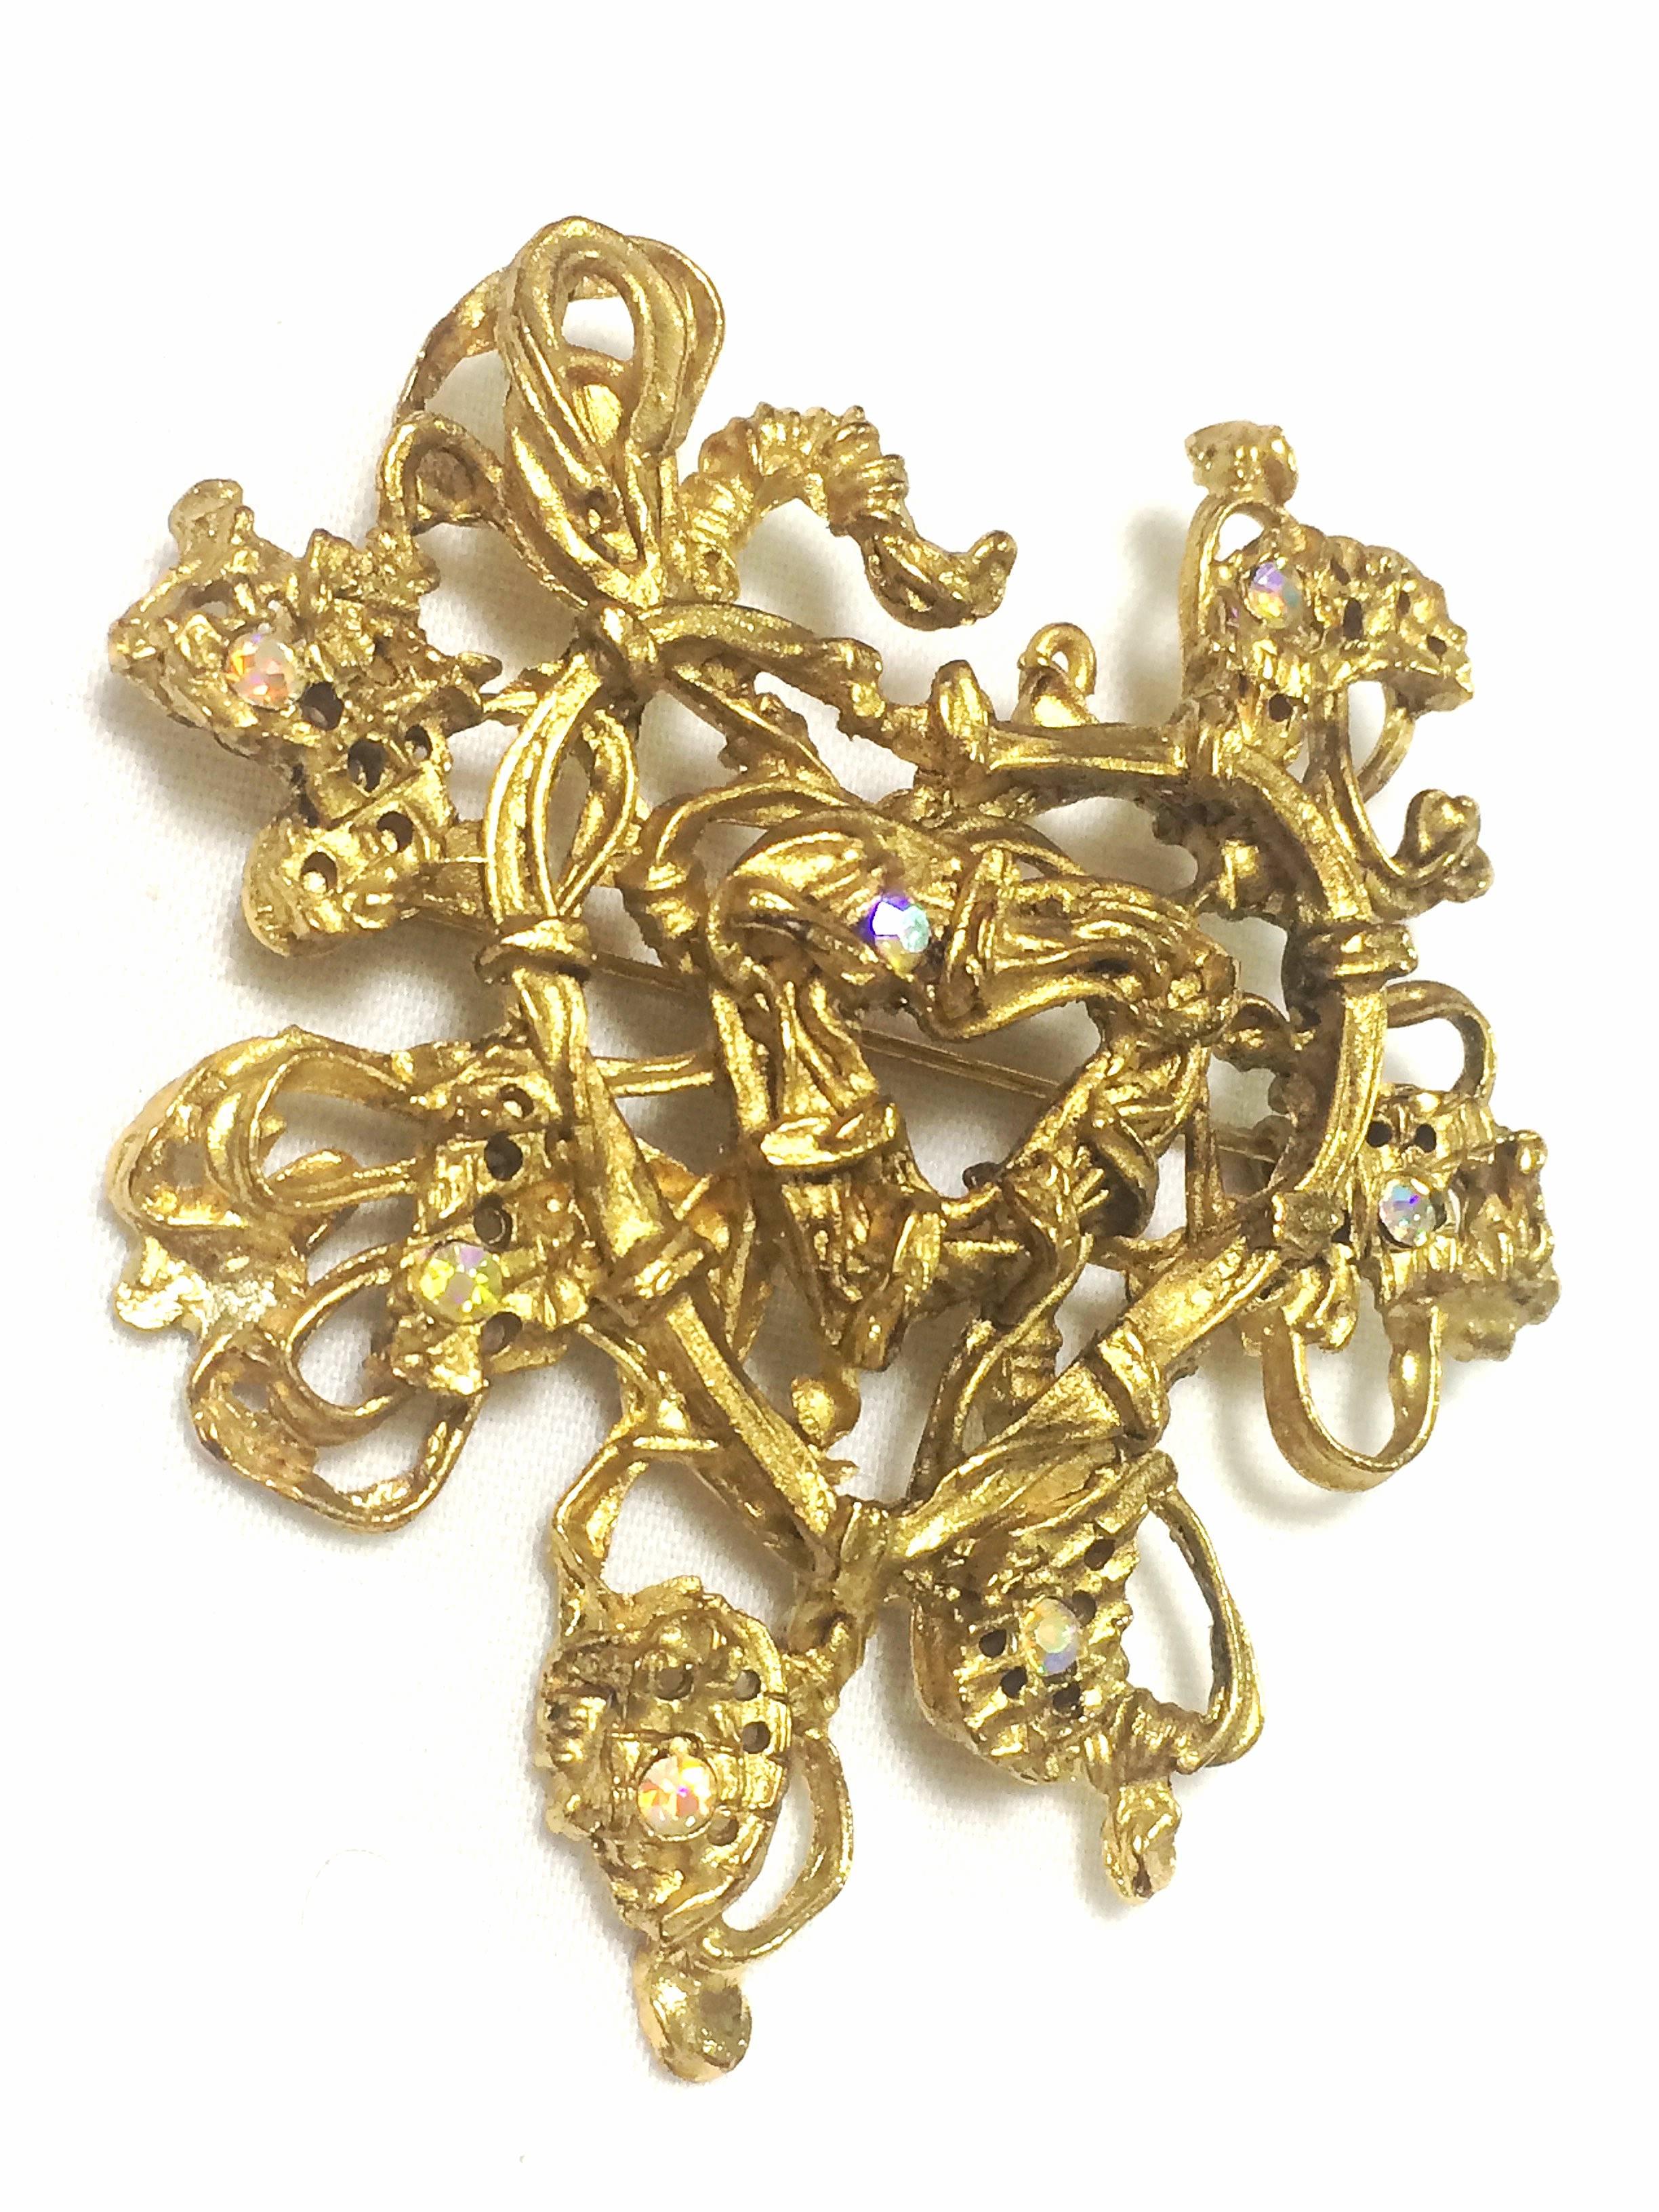 Vintage Christian Lacroix golden edwardian heart and arabesque design brooch In Excellent Condition For Sale In Kashiwa, Chiba